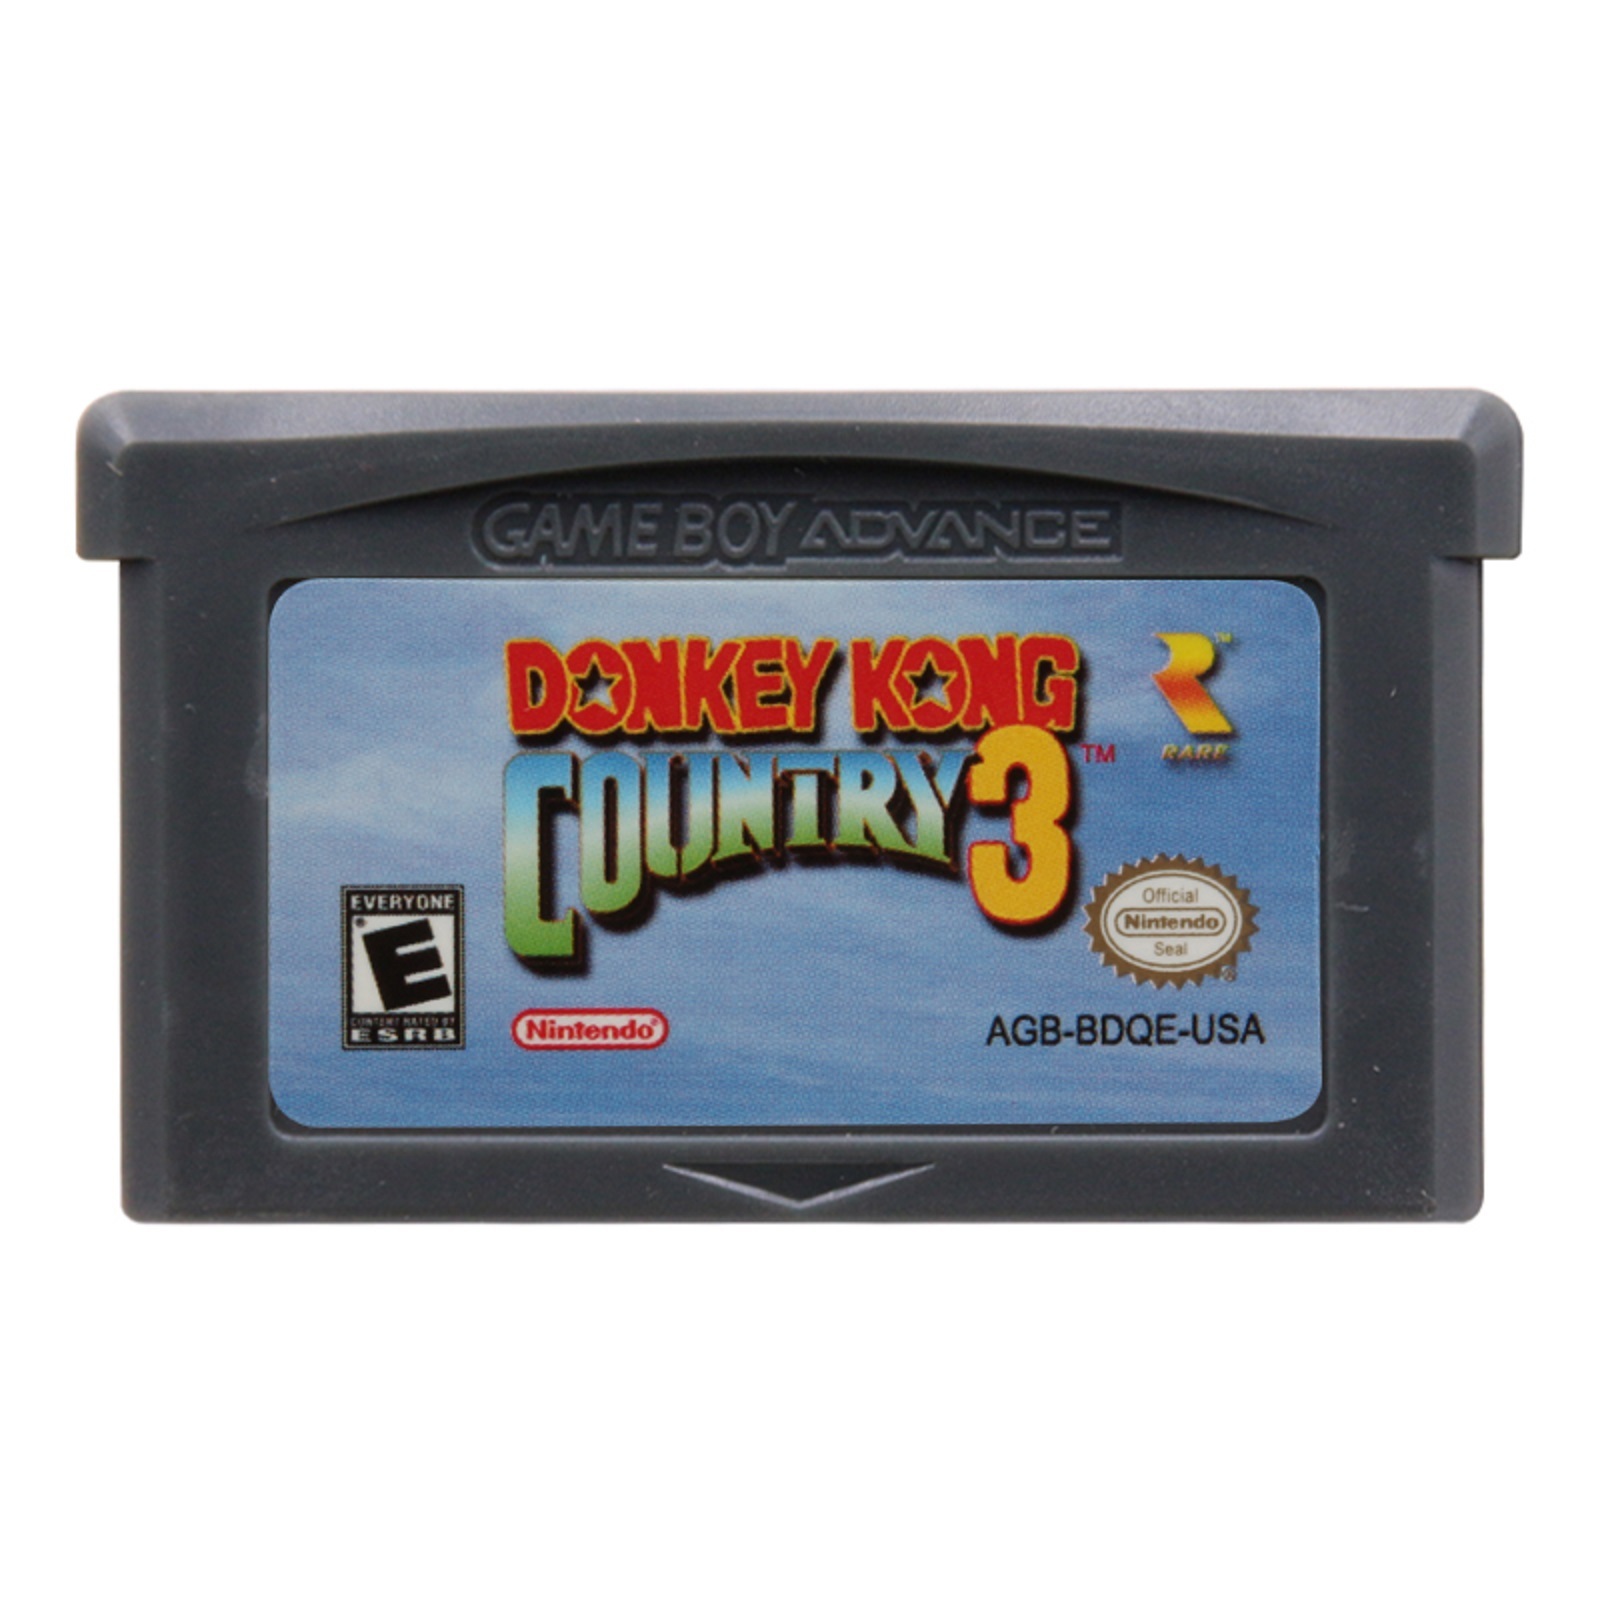 download gameboy advance donkey kong country 2